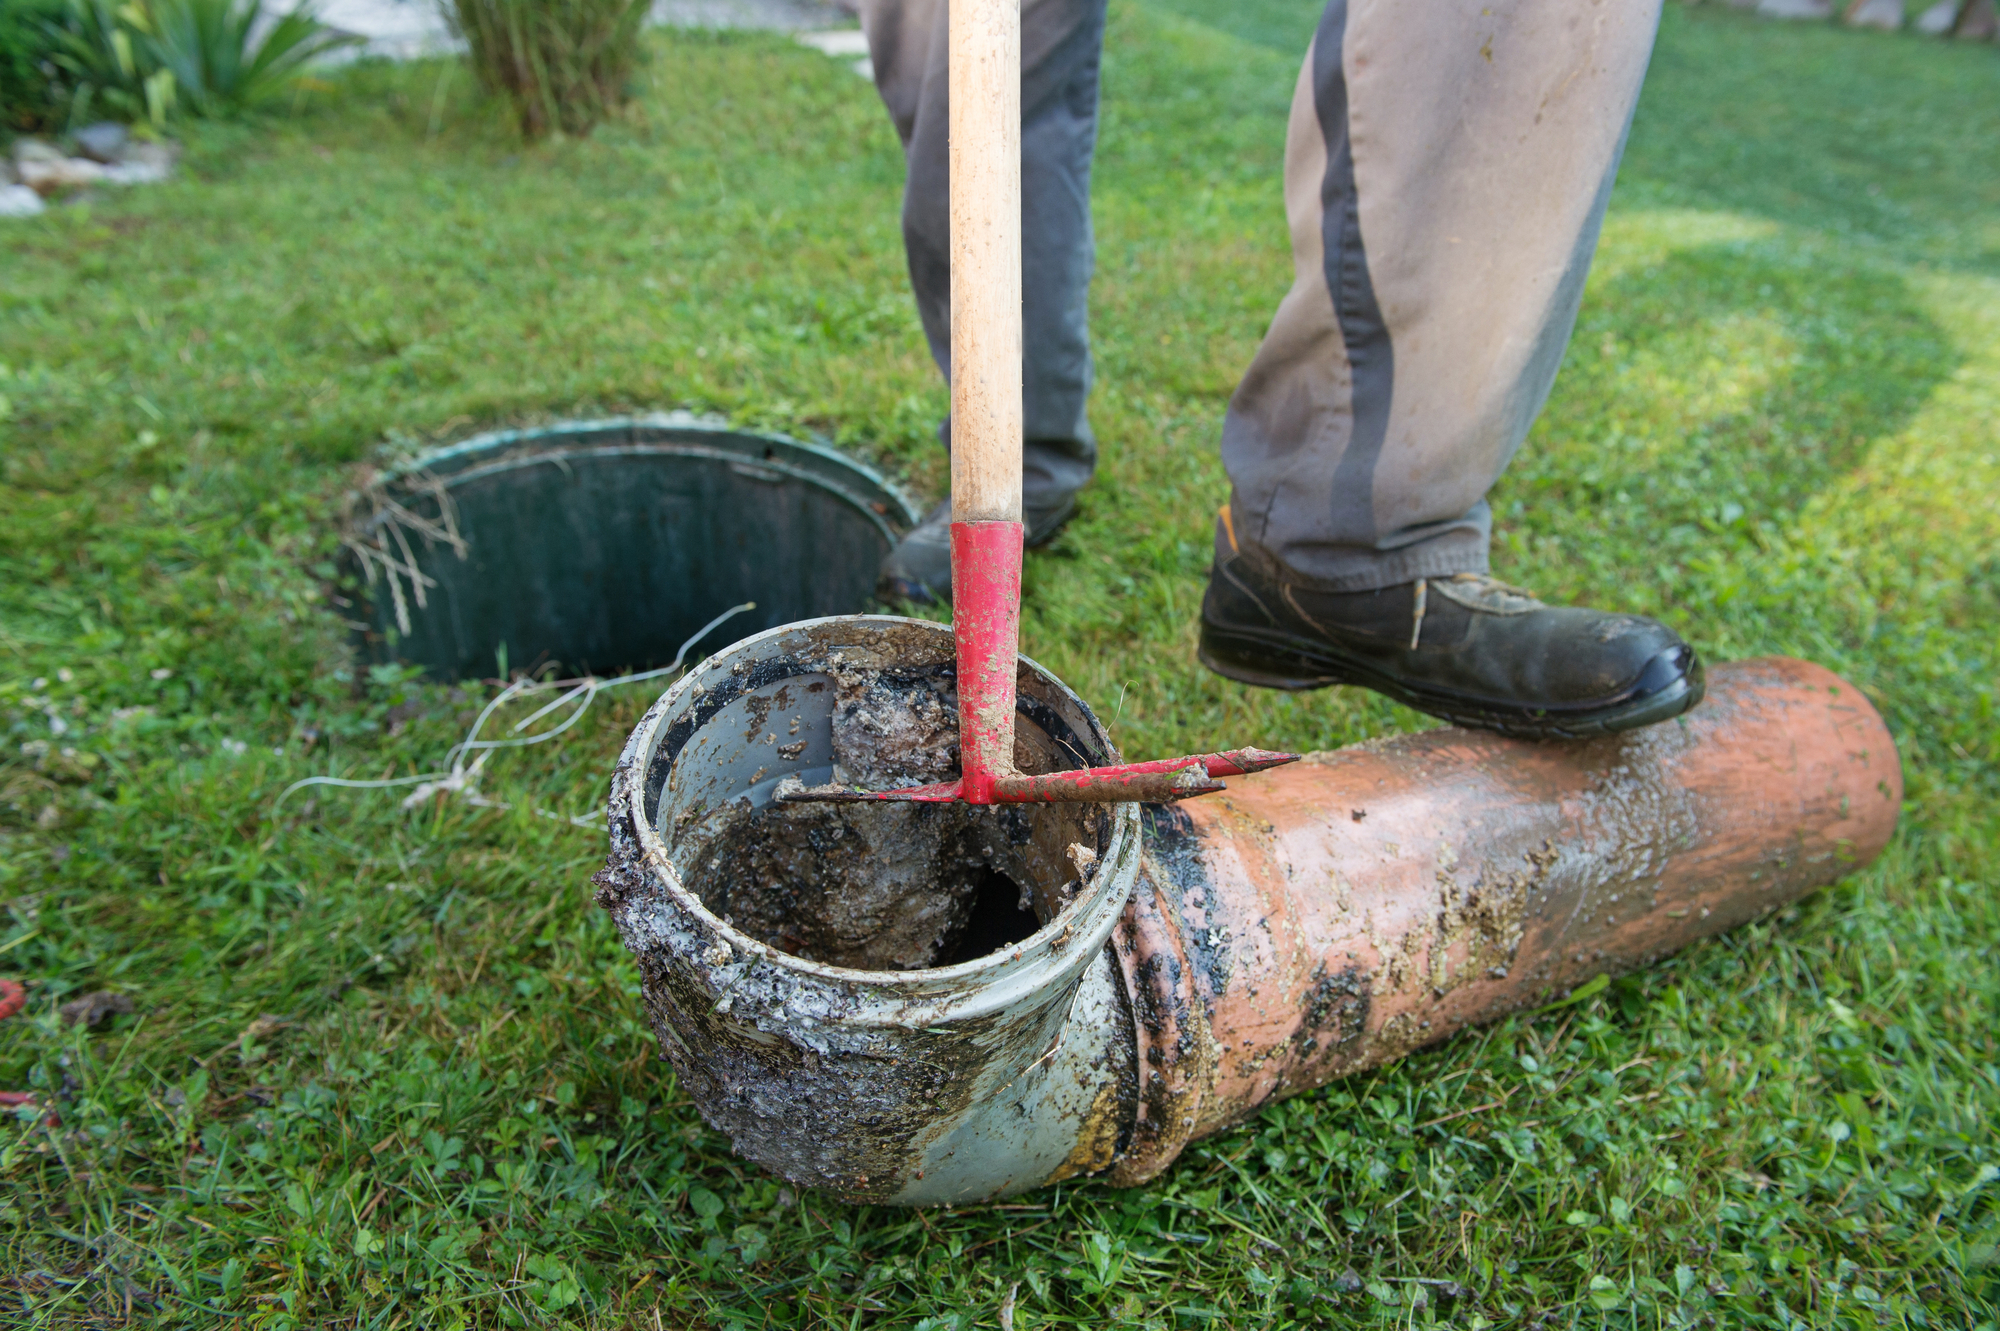 How to repair cast iron sewer pipe